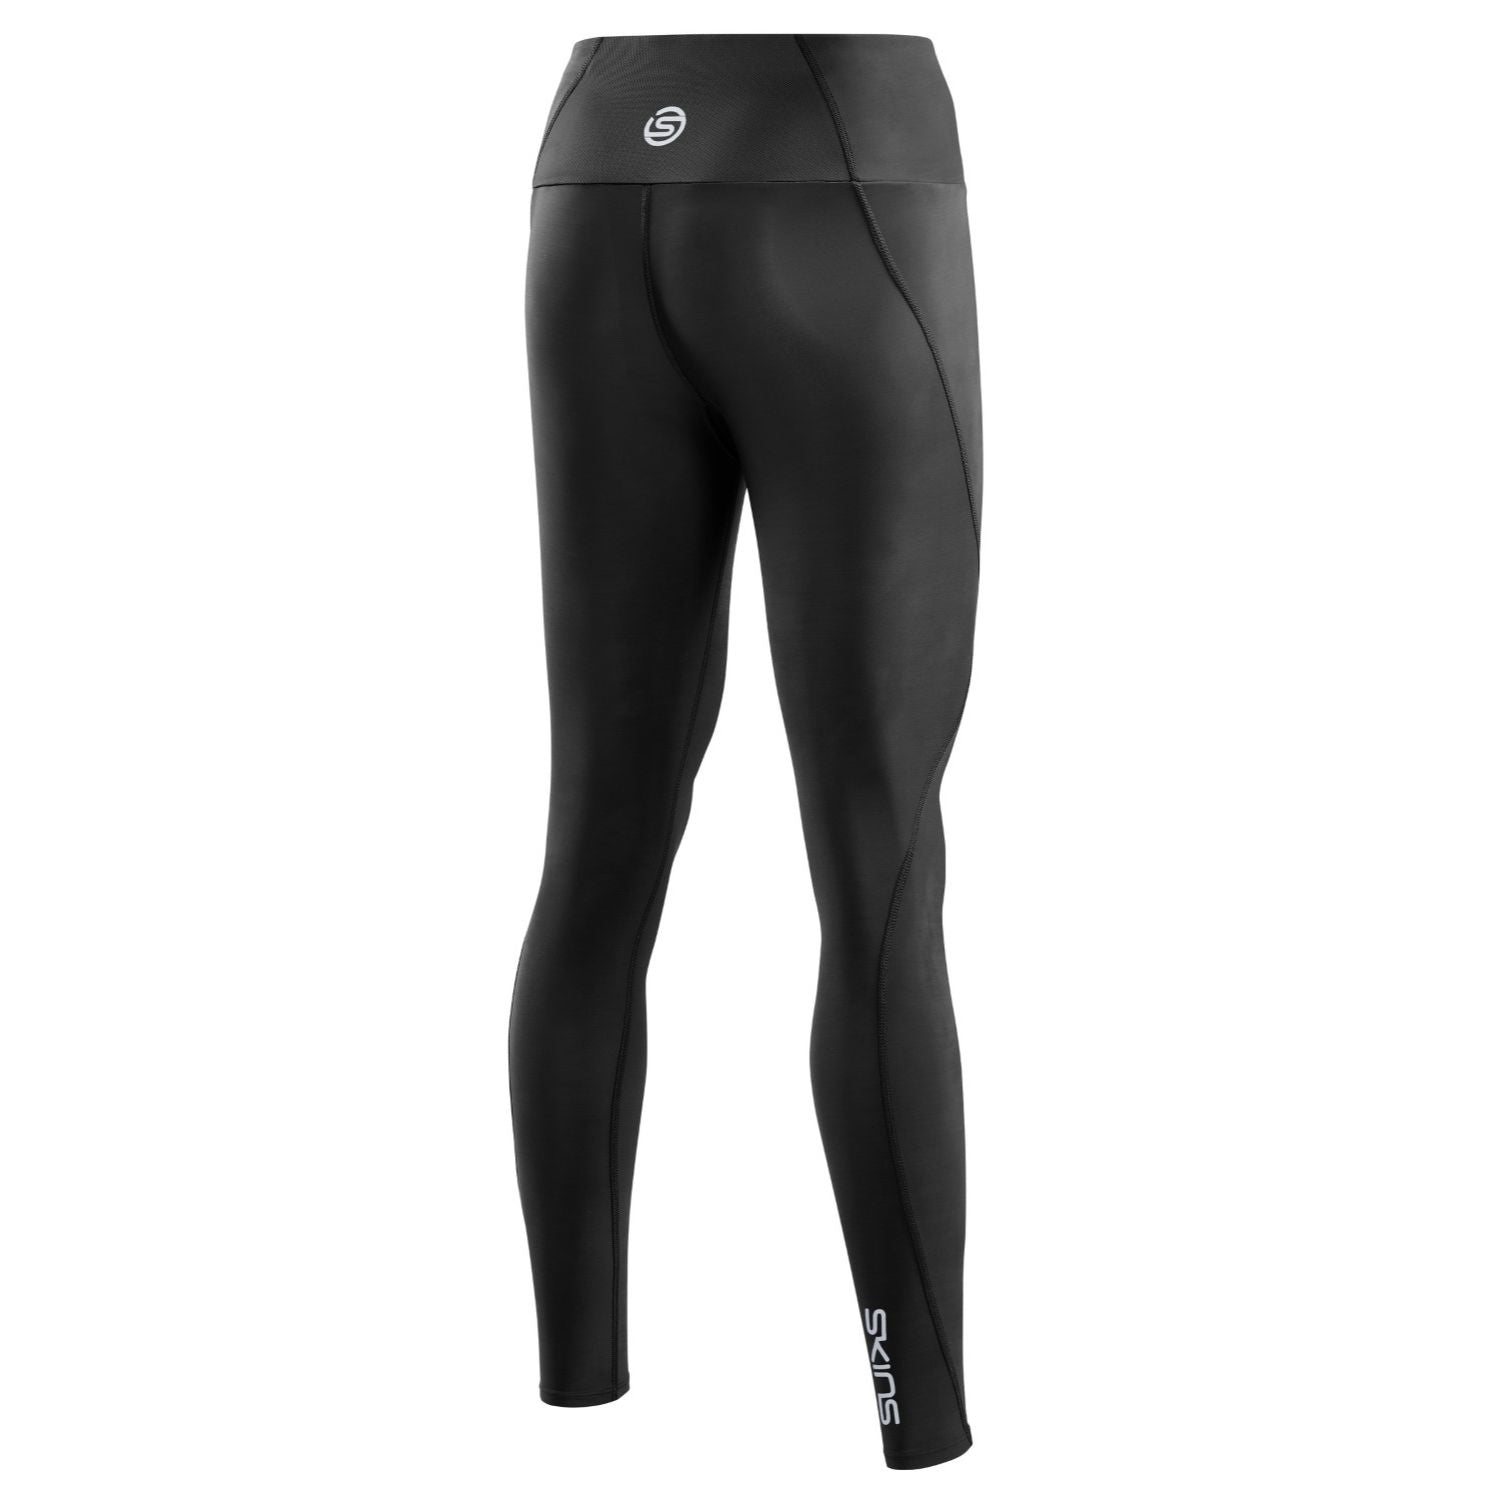 Skins Series-5 Travel and Recovery Mens Compression Long Tights - Black